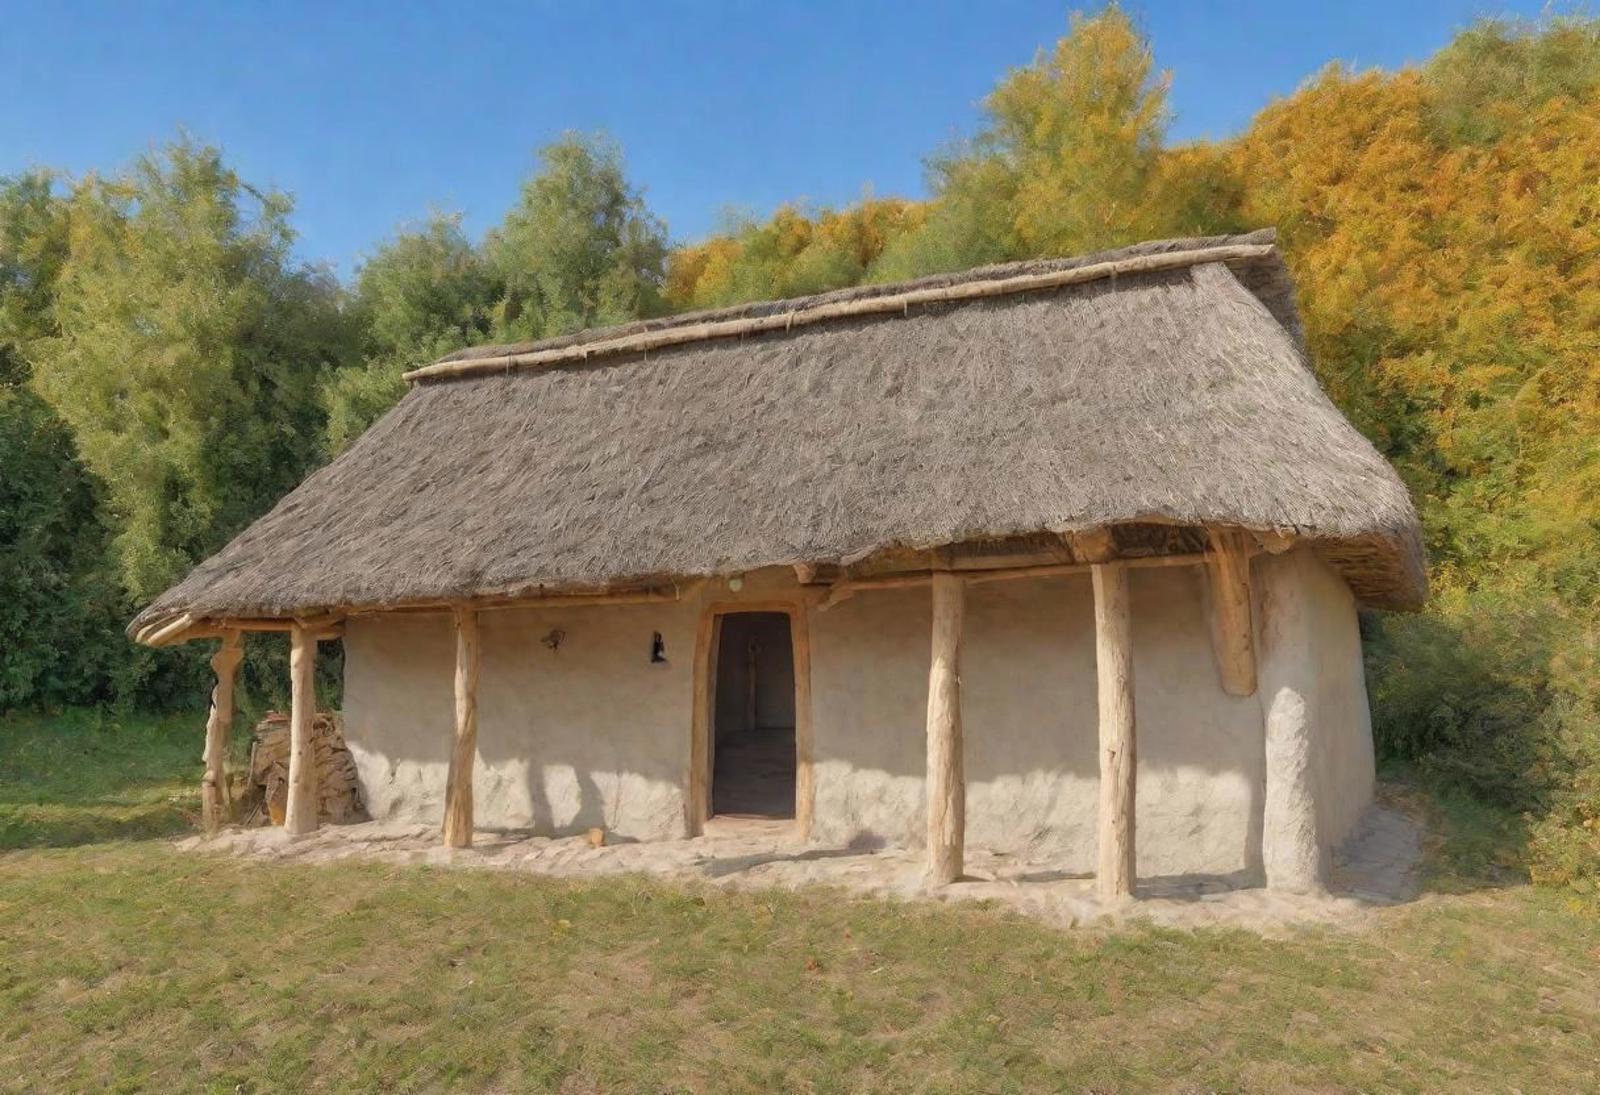 neolithic-houses image by cristianchirita749